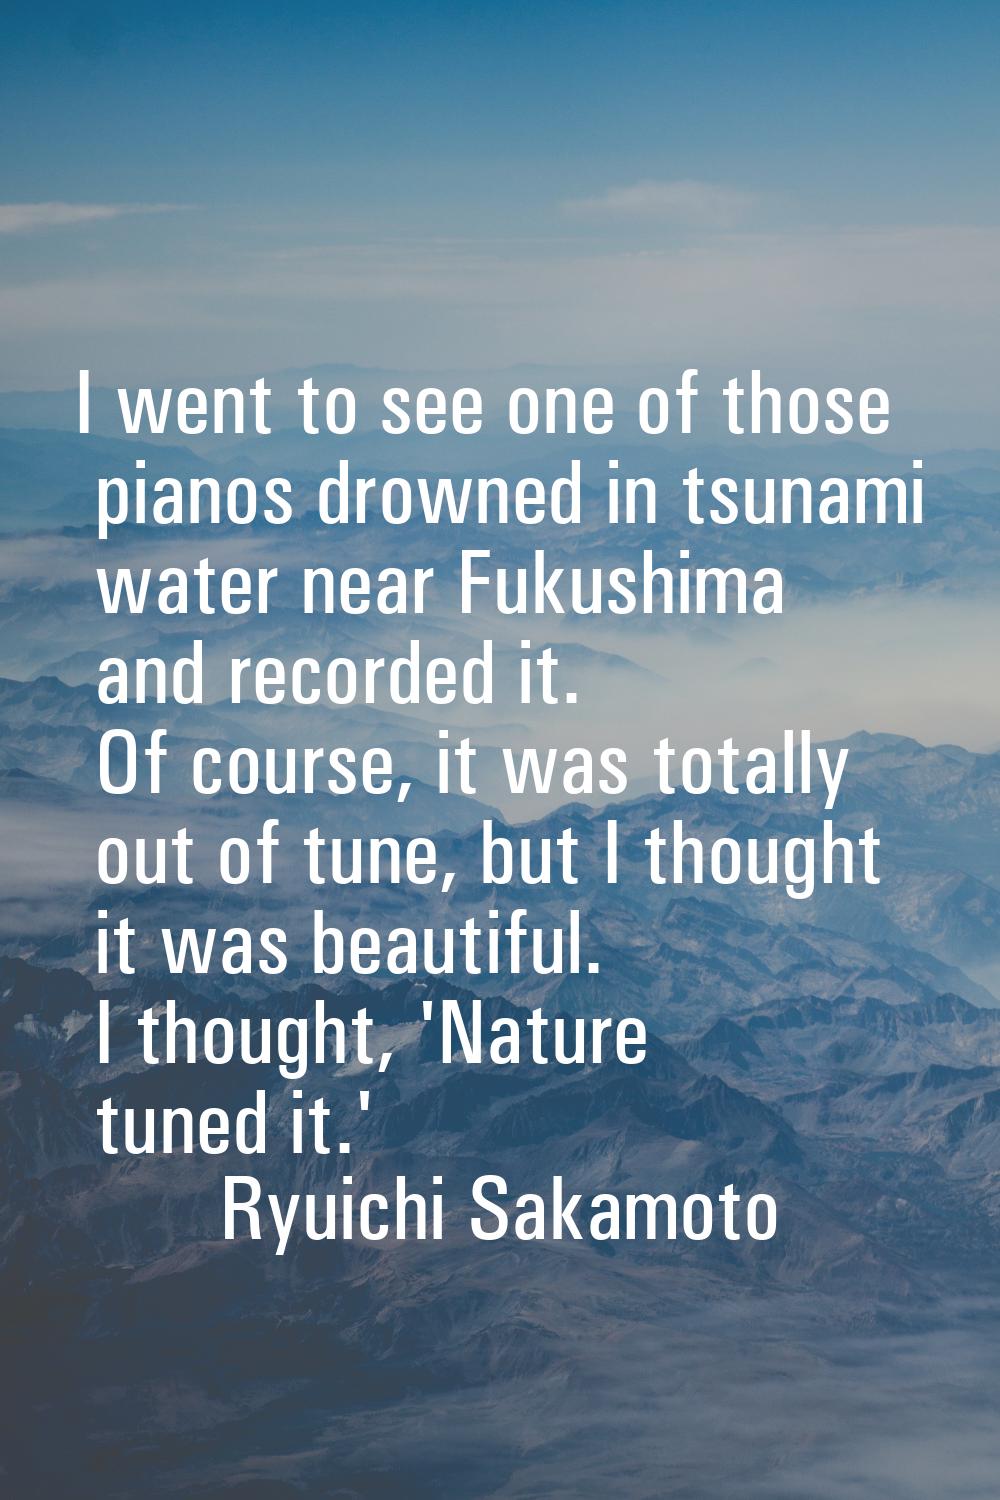 I went to see one of those pianos drowned in tsunami water near Fukushima and recorded it. Of cours